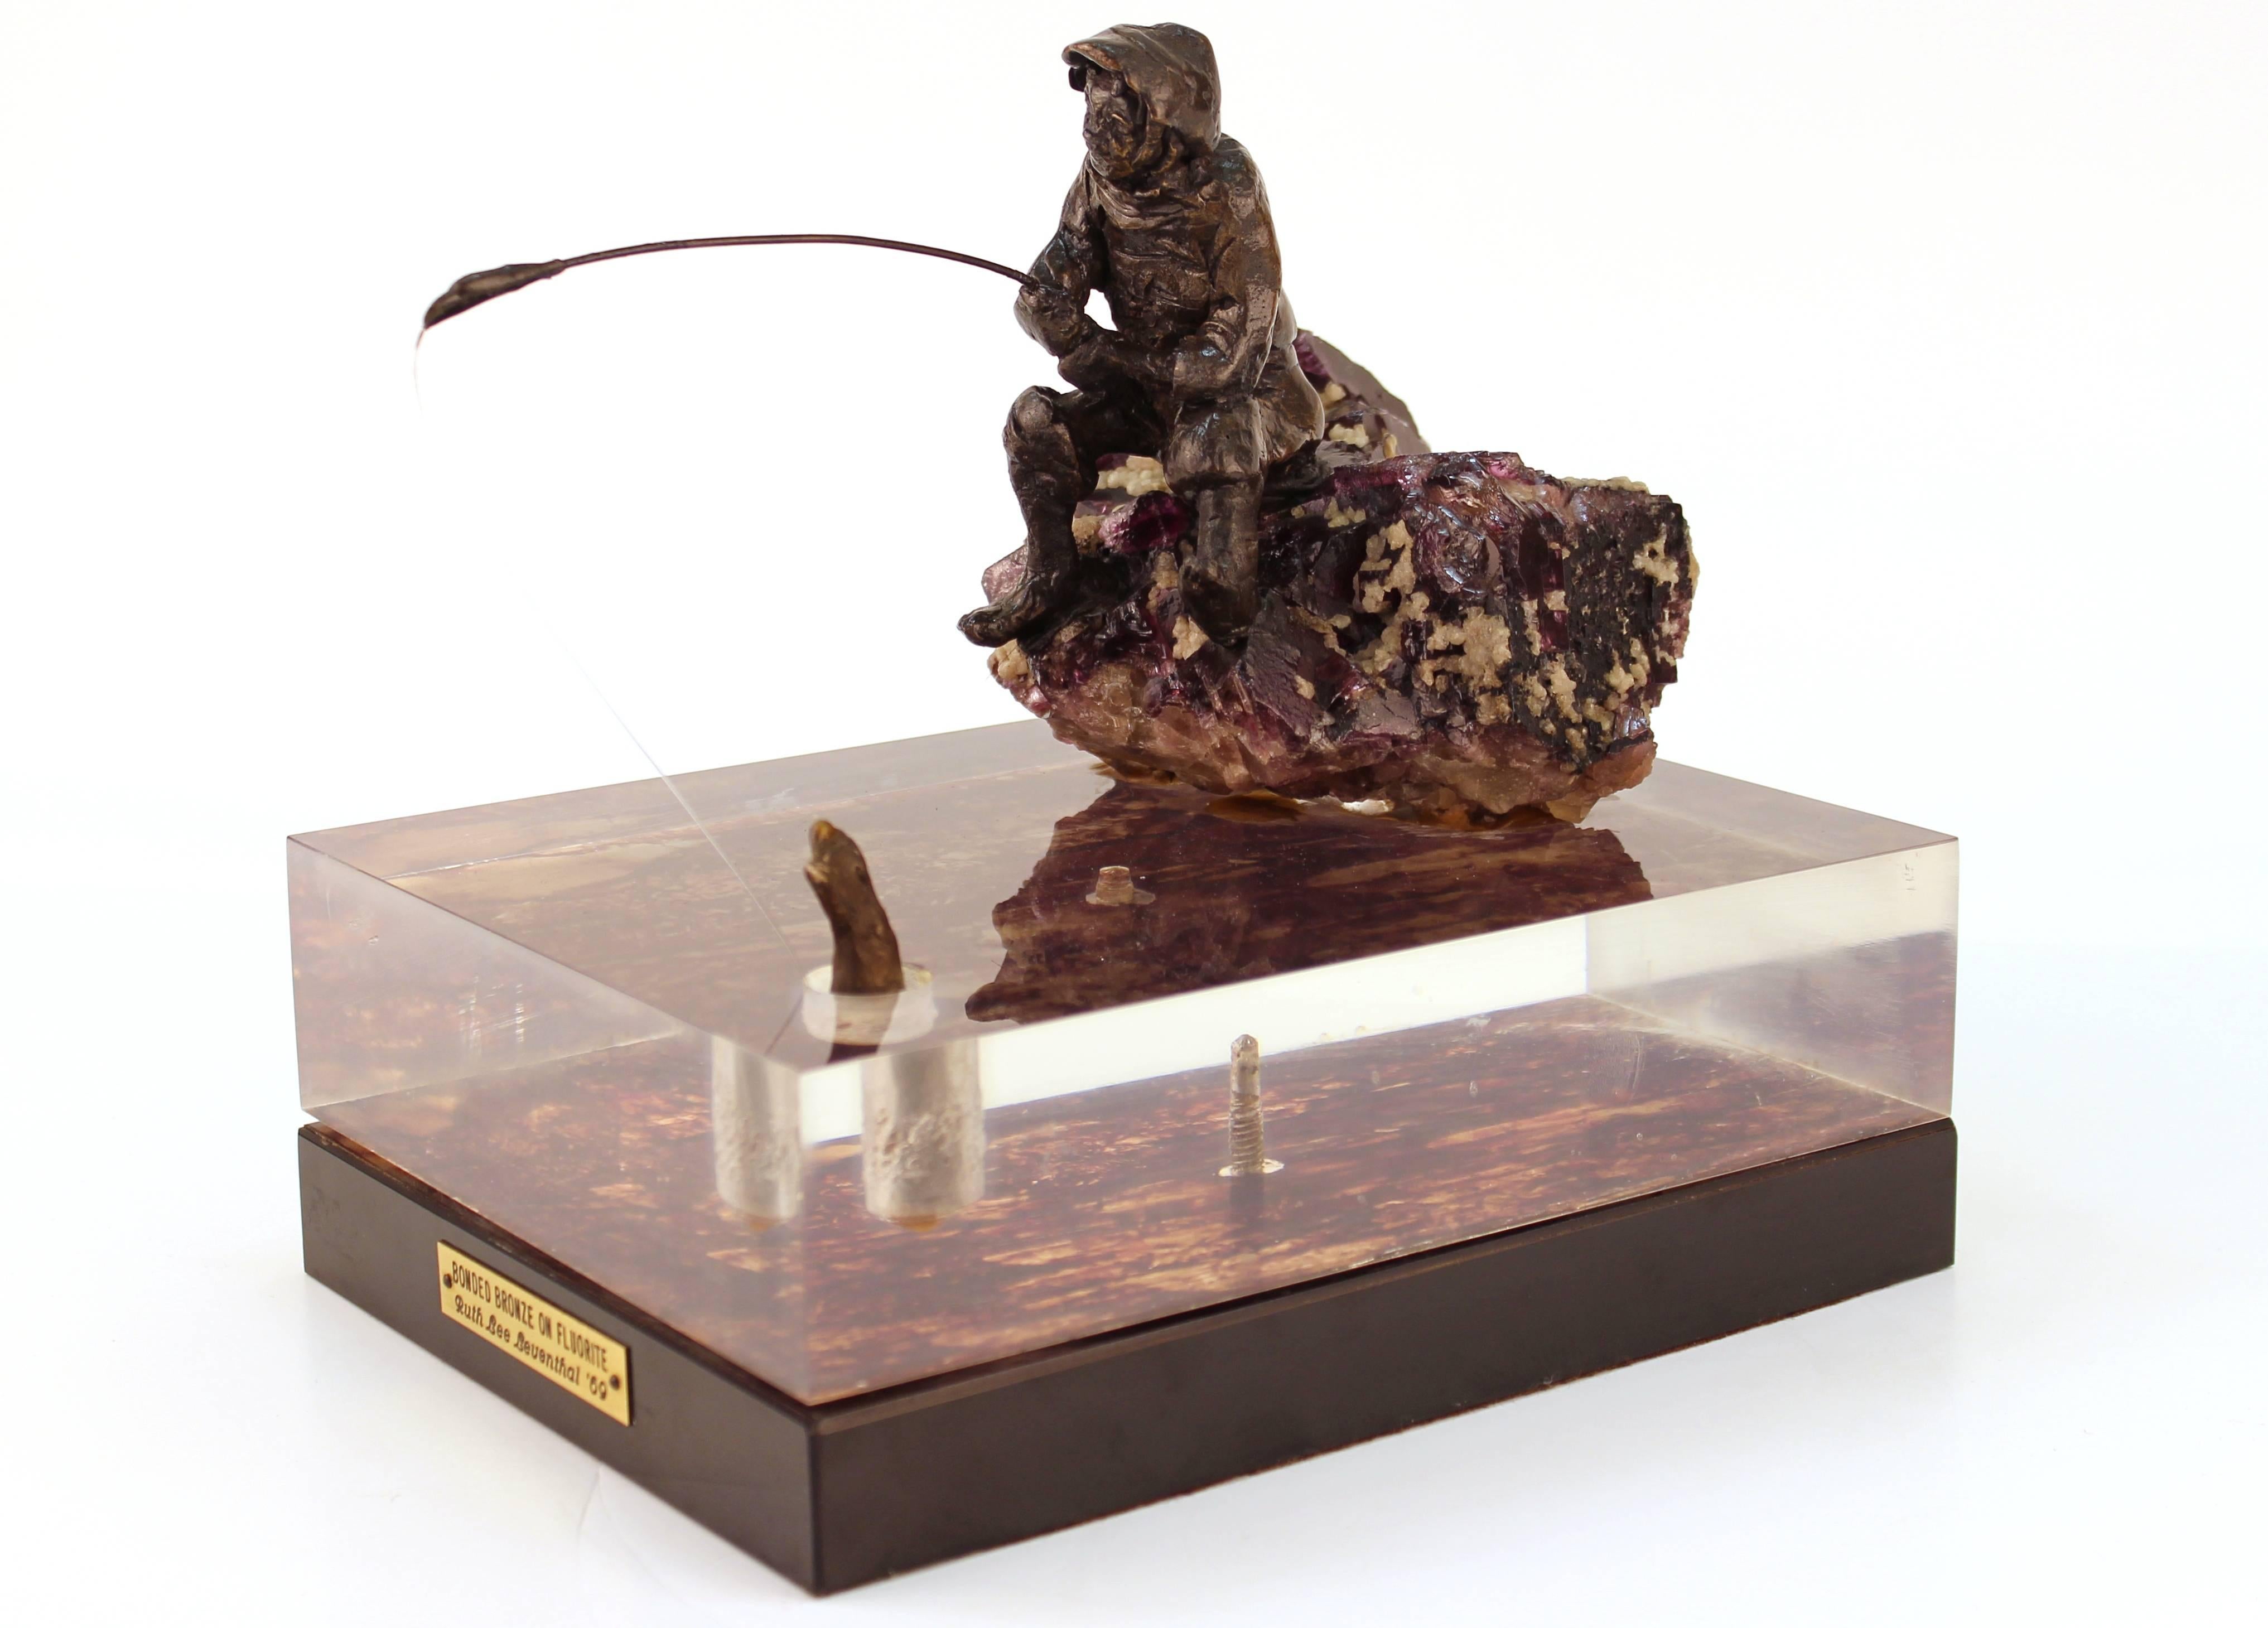 Ruth Lee Leventhal sculpture of a bronze fisherman sitting on a fluorite rock. The fisherman's line drops into a clear Lucite lake with a fish on the other end. The fish piece can sit in our out of the Lucite lake. Includes plaque on base that reads